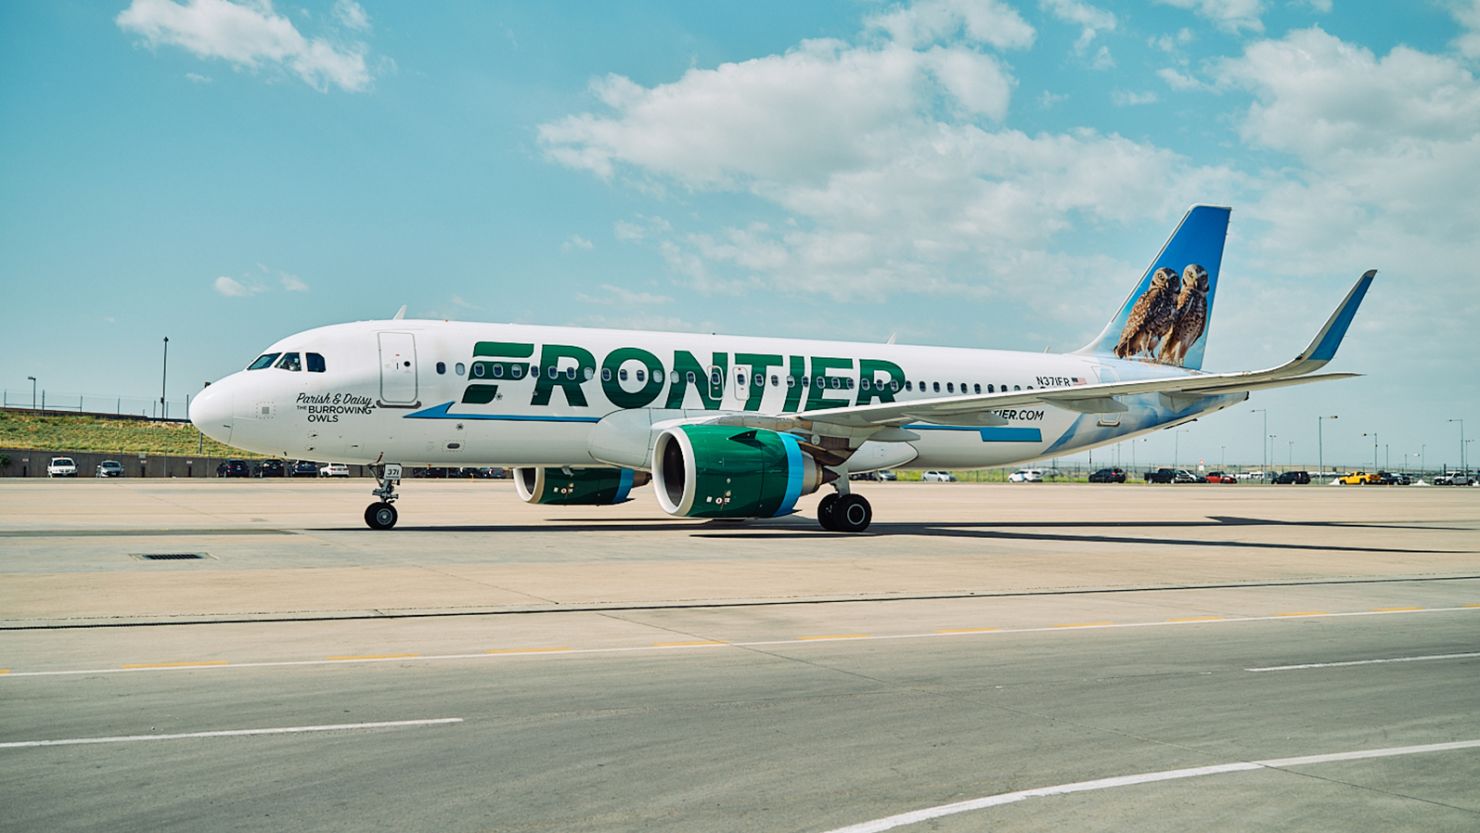 Frontier's flight pass allows for unlimited last-minute flights for $599 for a year.